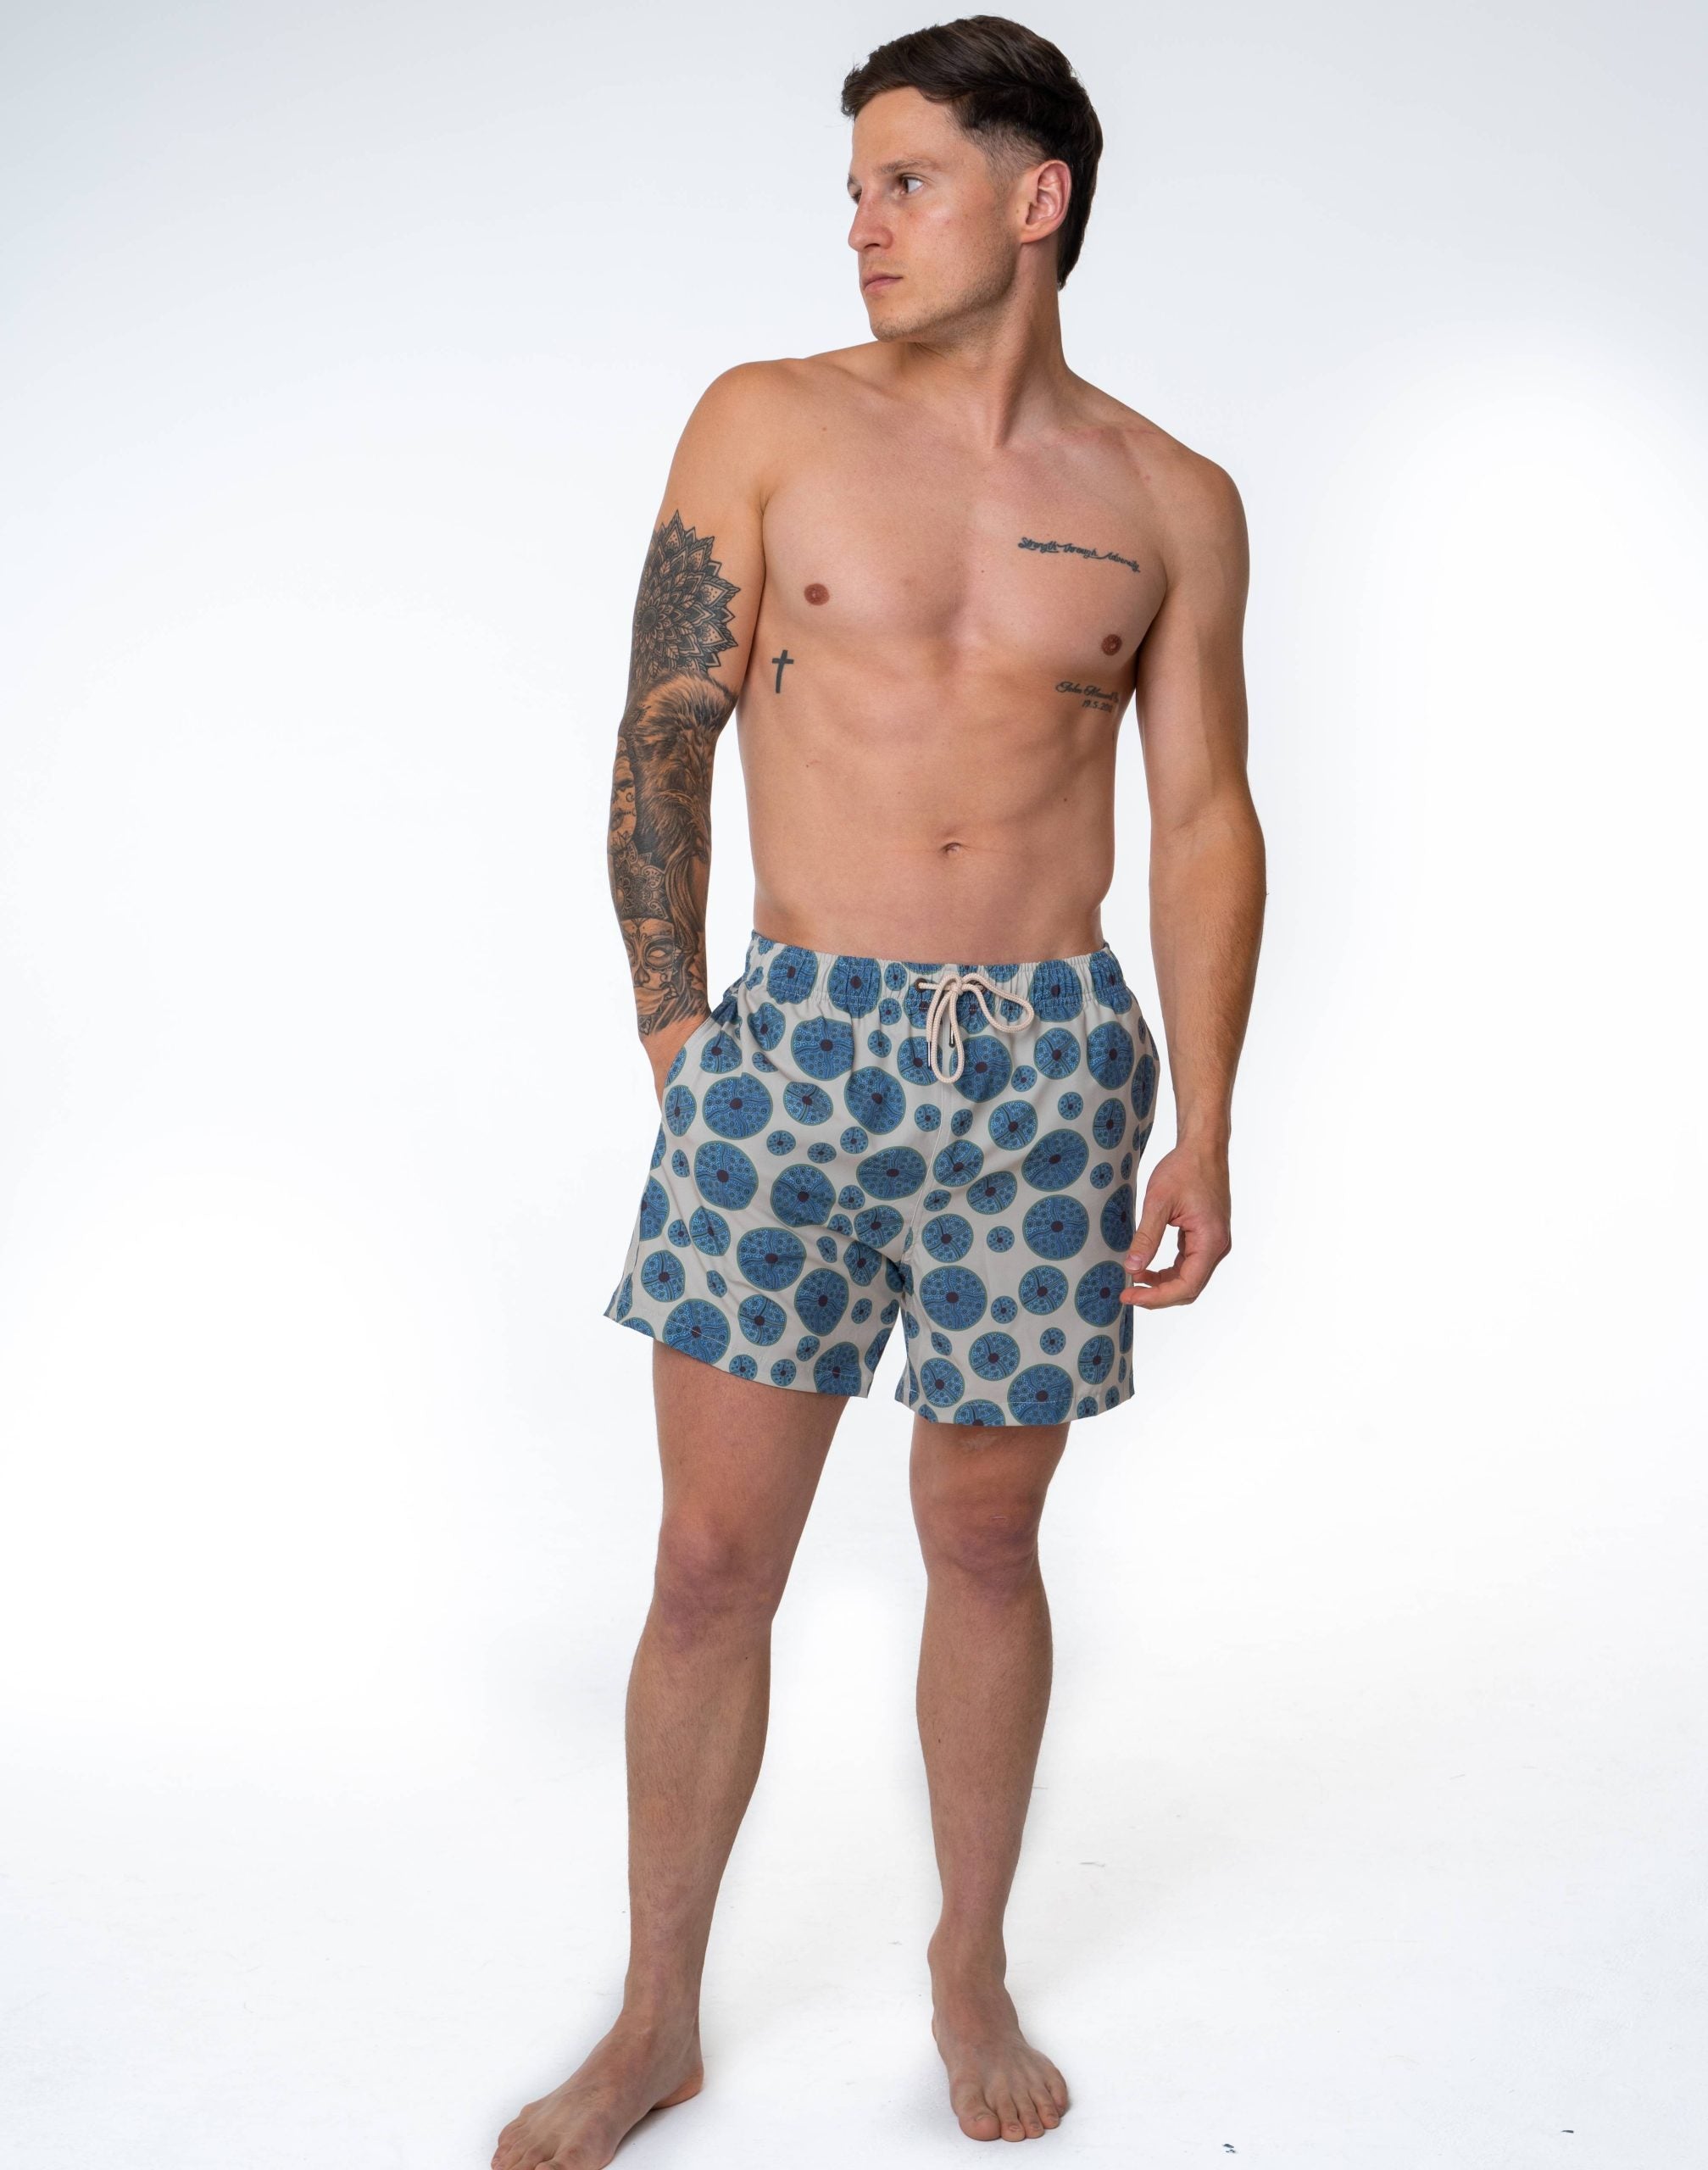 Sustainable Kids' Sea Urchin Print Shorts from SevenC's - Front View on model